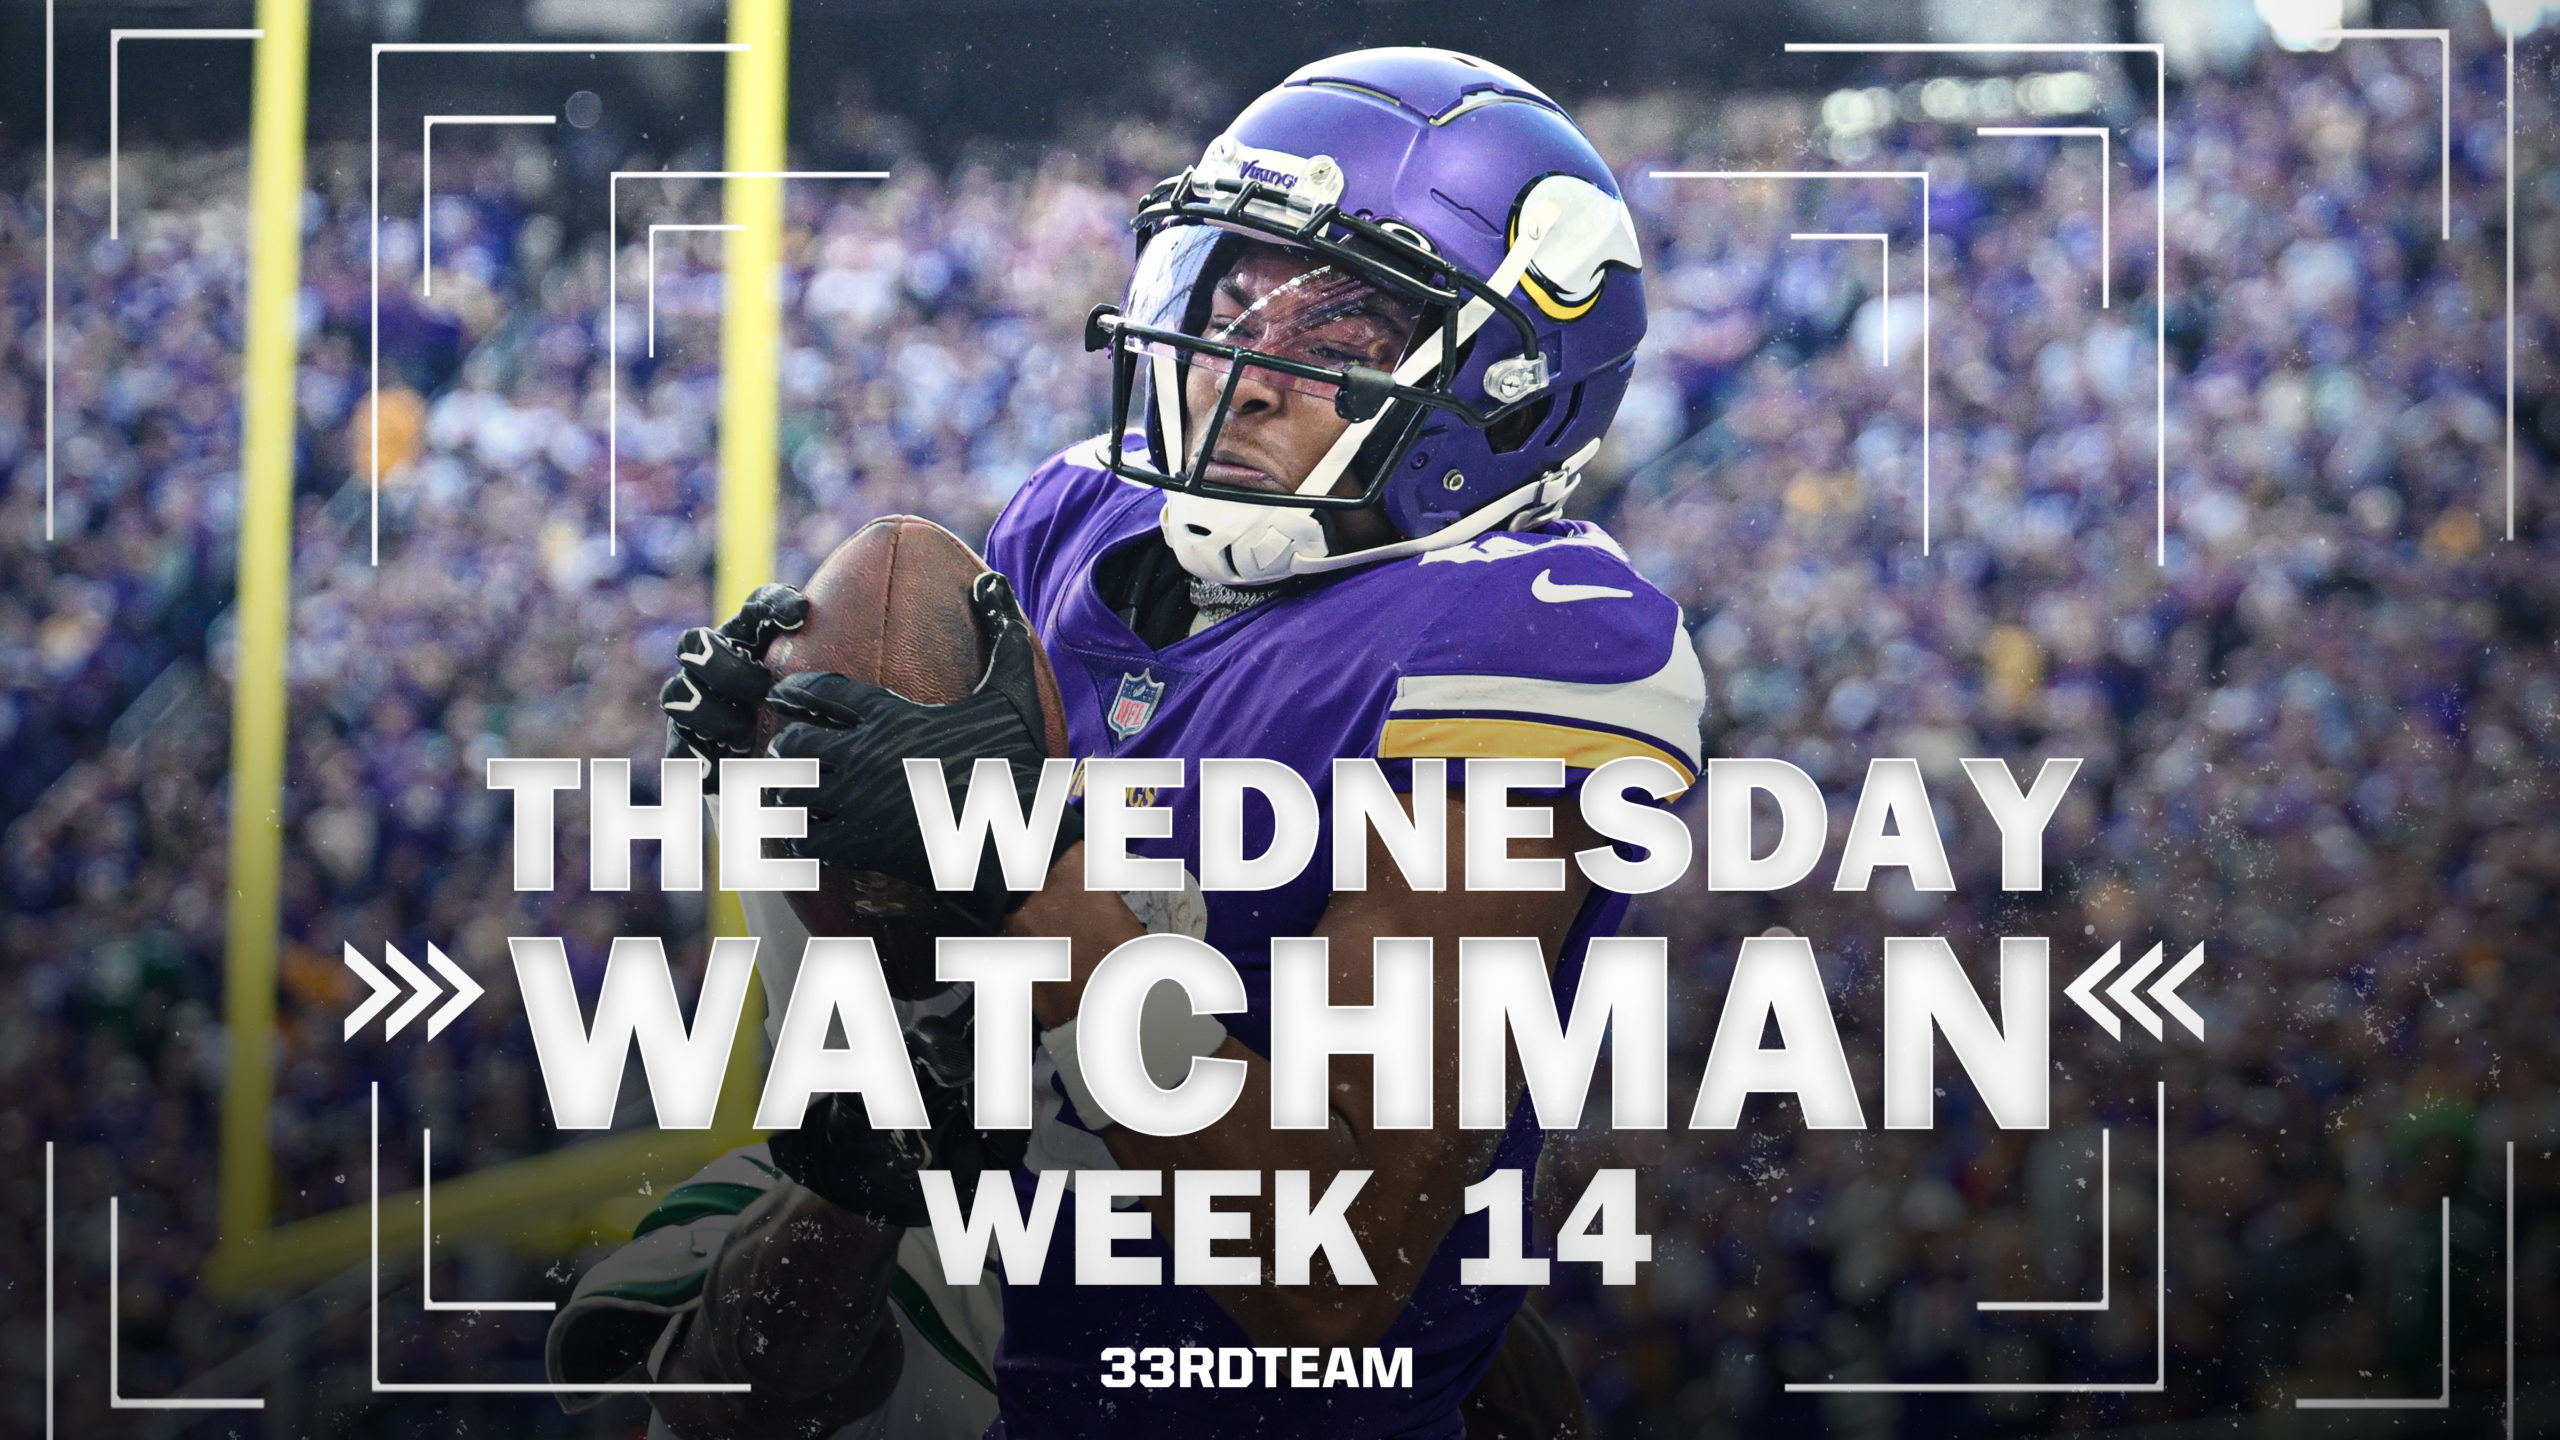 Wednesday Watchman: NFL Week 14 Betting, DFS and Fantasy Information to Know